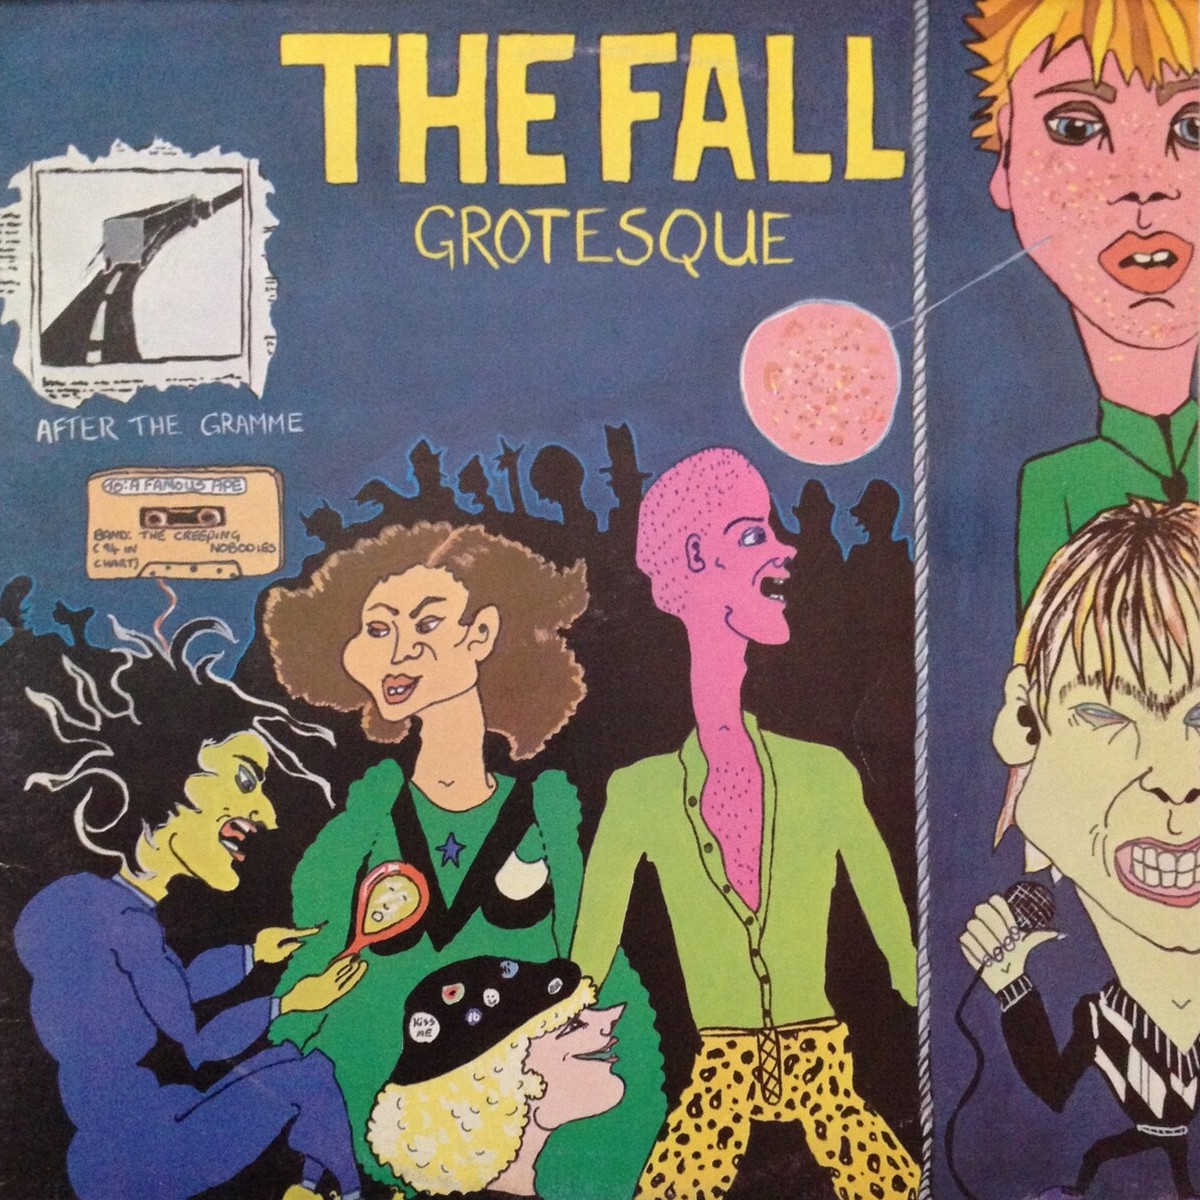 You are currently viewing Godišnjica objavljivanja albuma Grotesque (After the Gramme) post-punk benda The Fall